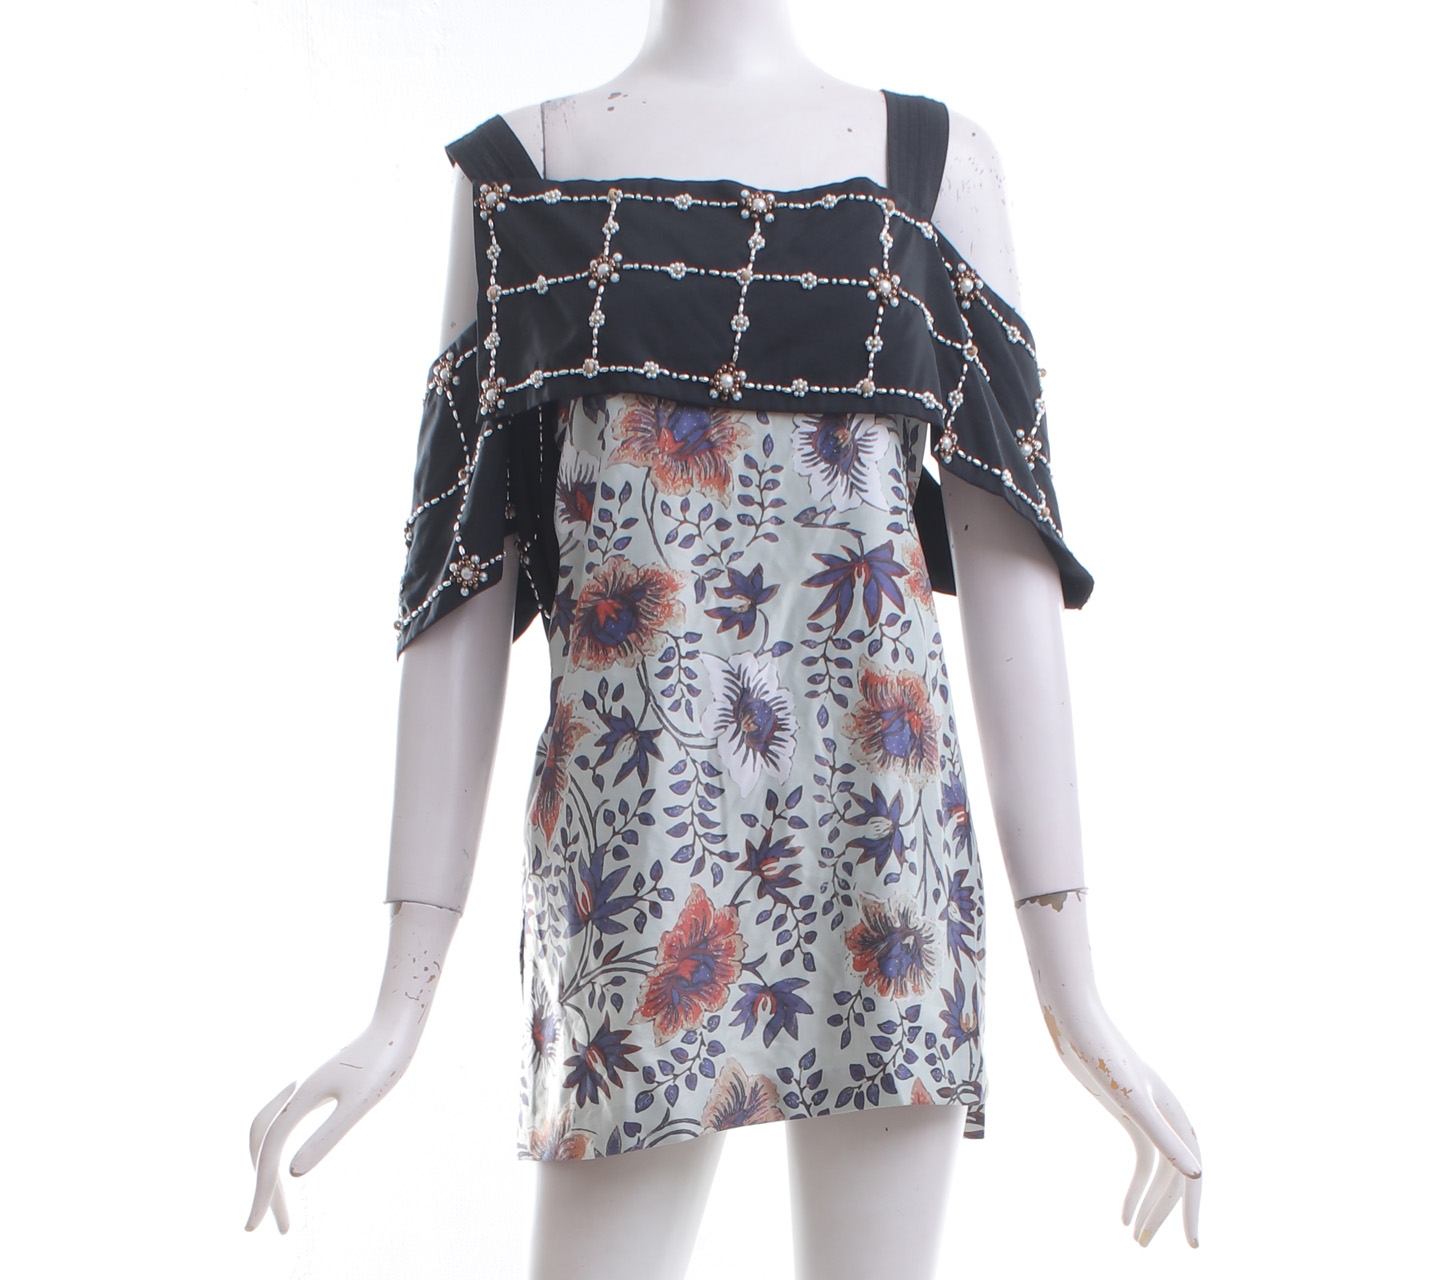 Toton Mint & Black Floral With Beaded Sleeveless